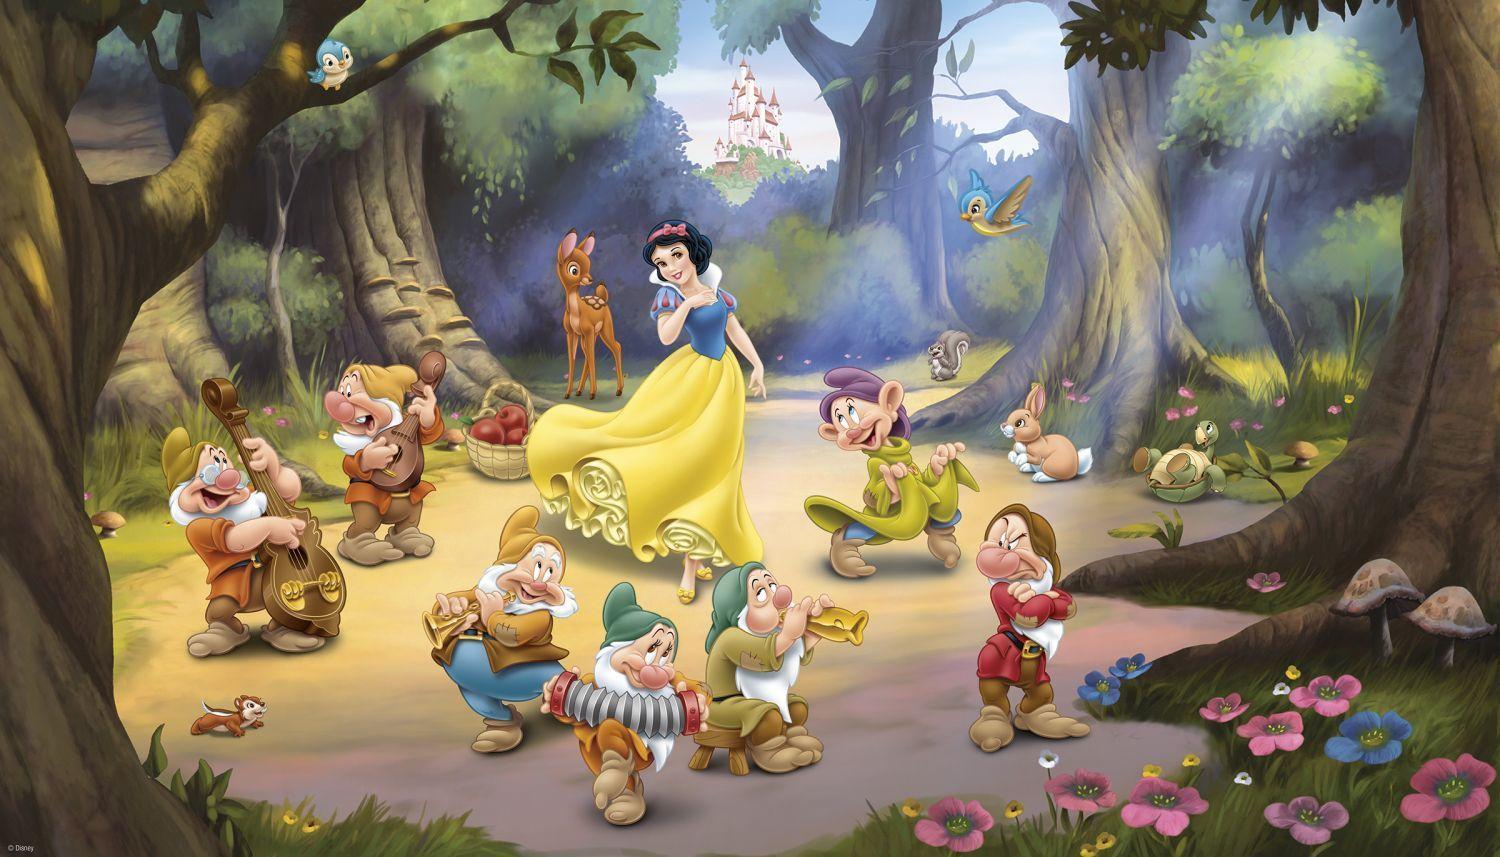 Snow White And The Seven Dwarfs Wallpapers Top Free Snow White And The Seven Dwarfs 